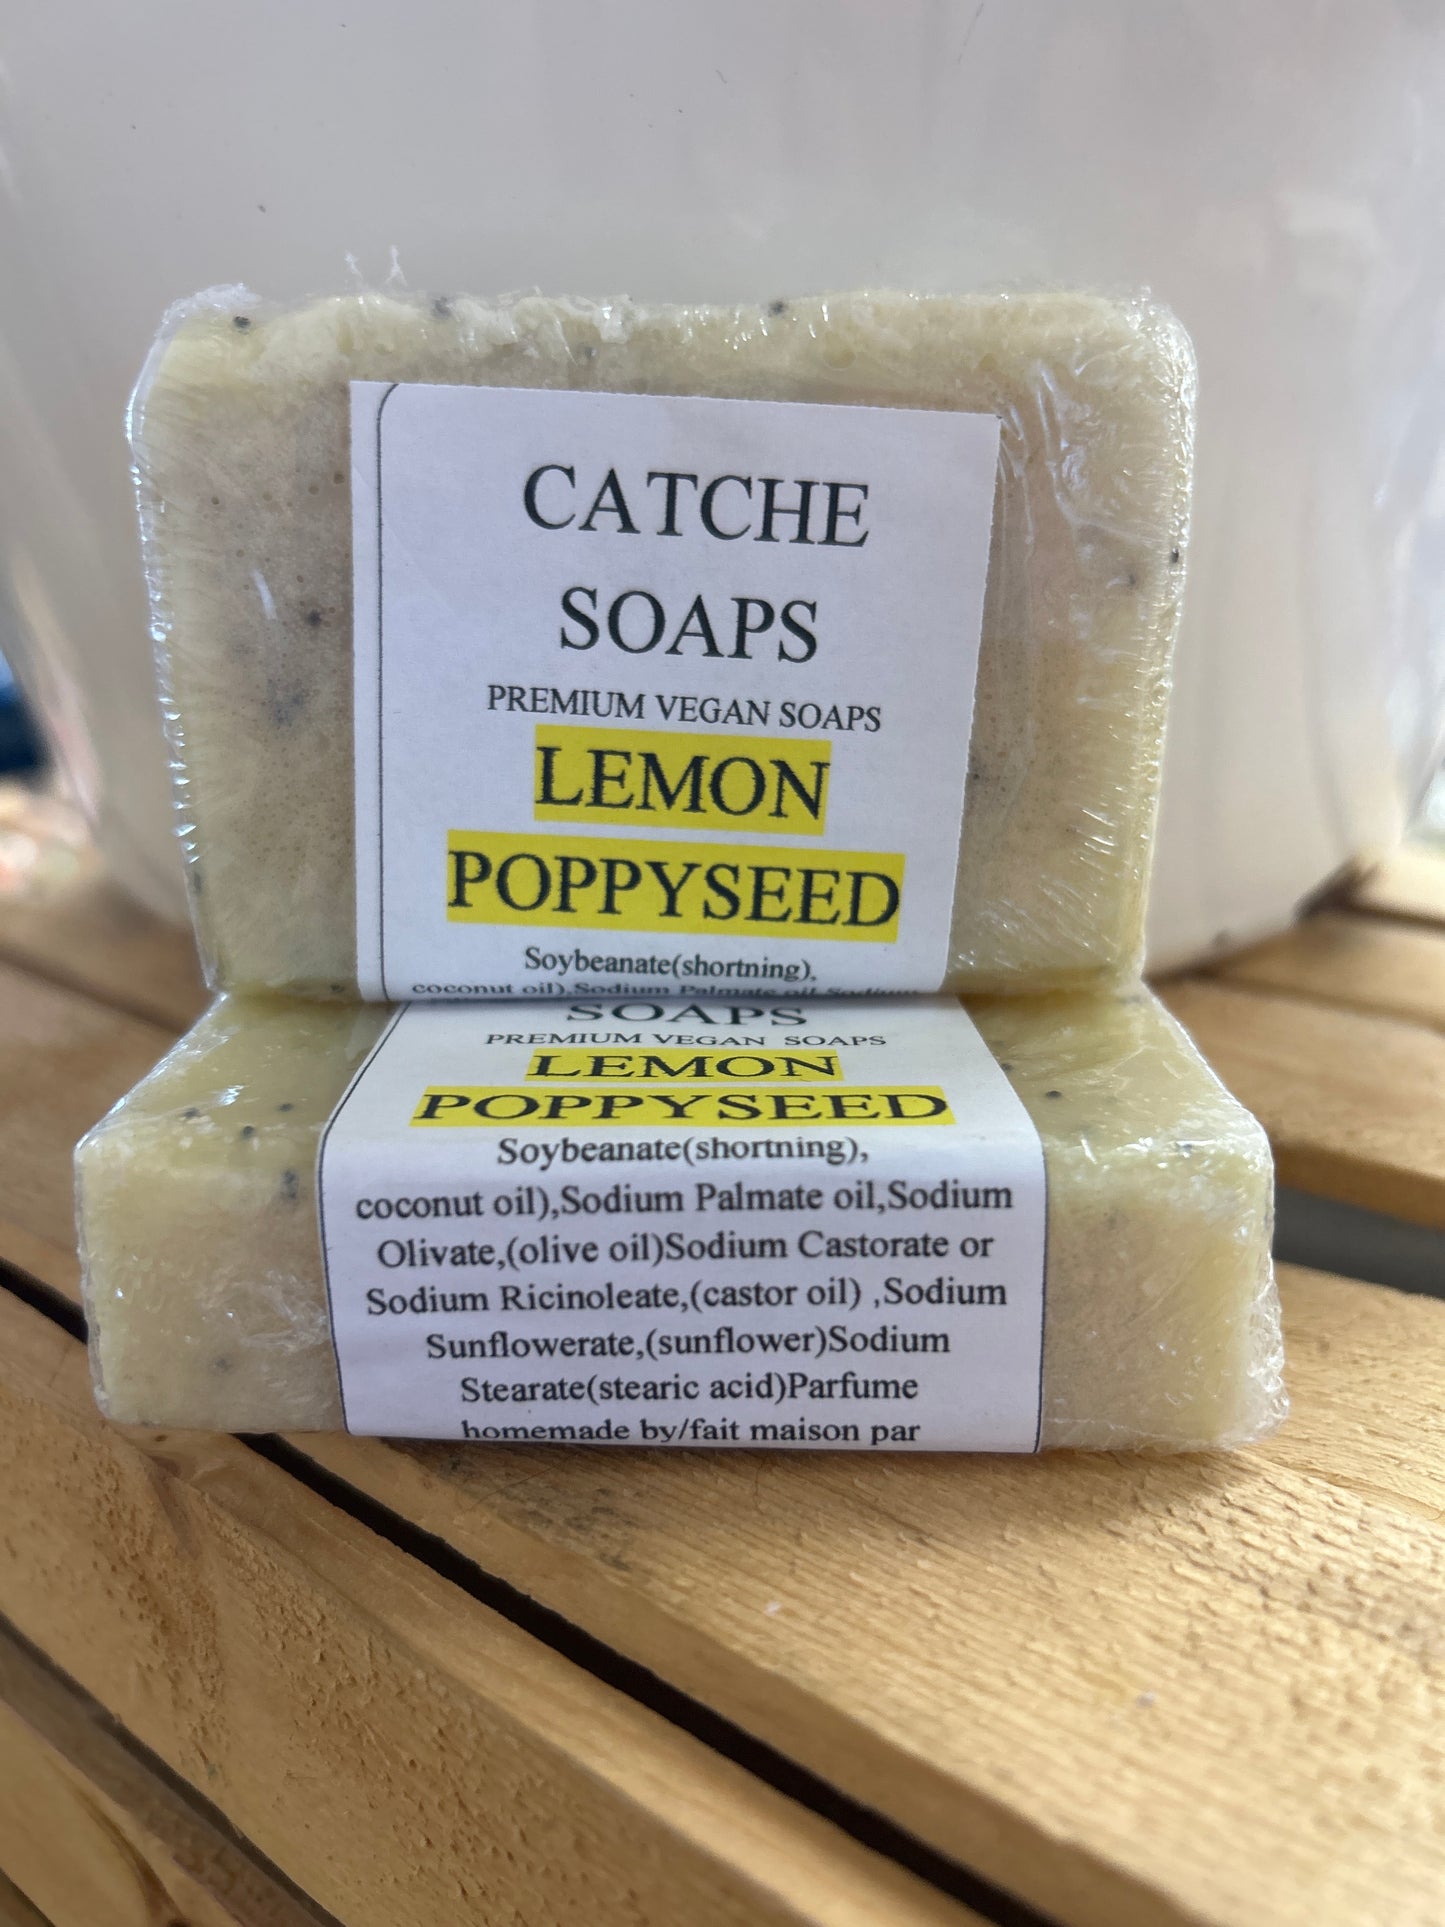 Light lemony scent with poppy seed for soft exfoliation.